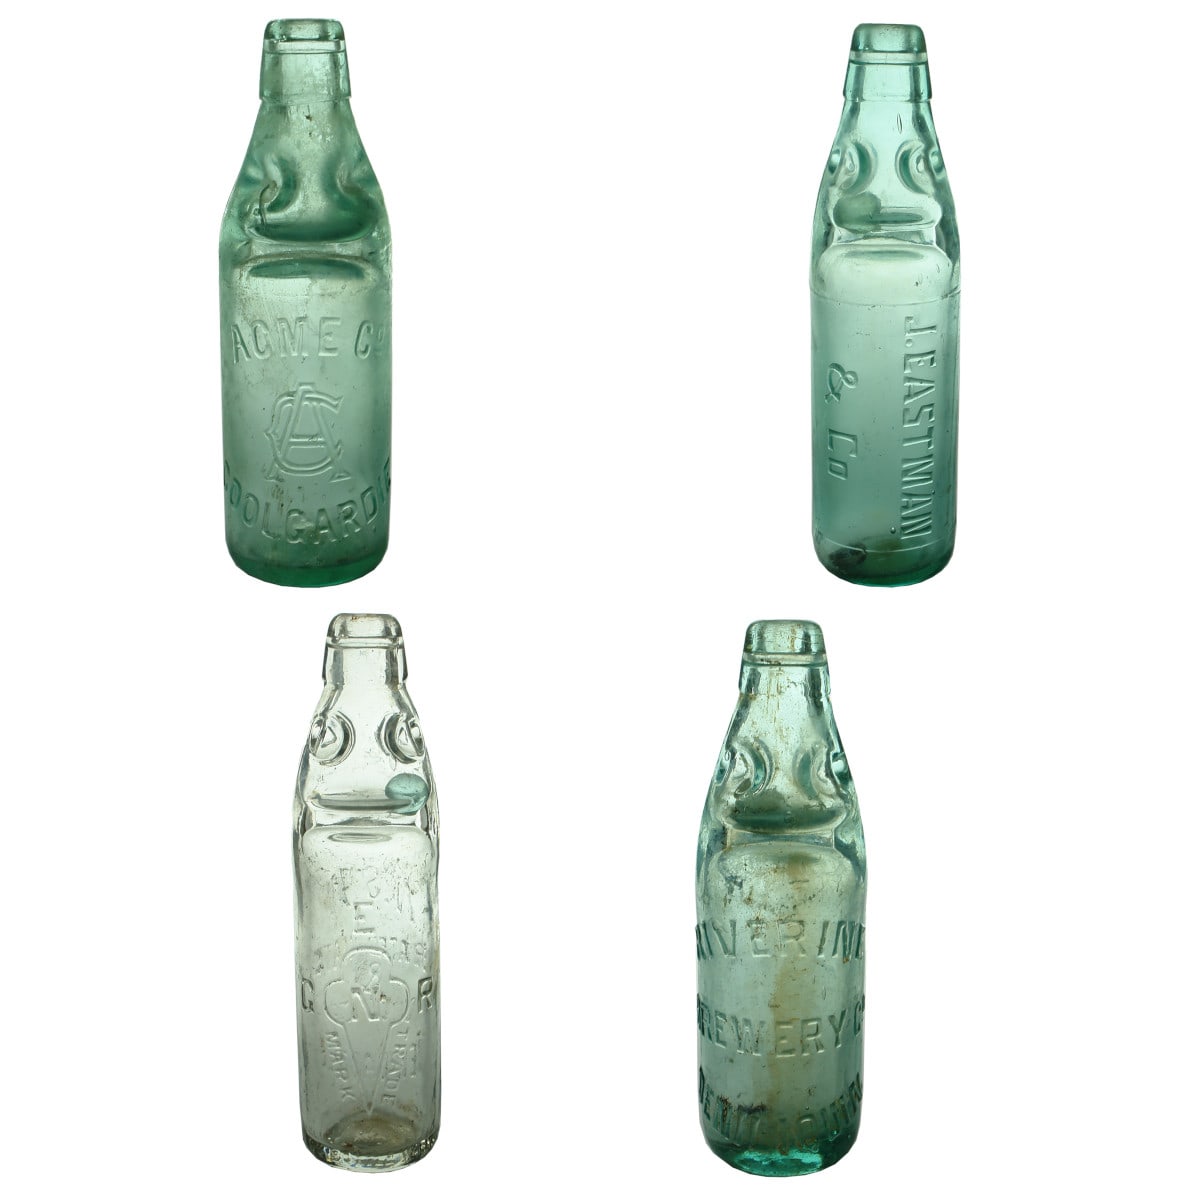 4 Codds: Acme Co. Coolgardie; J. Eastman & Co., Broken Hill; NSW Aerated Water Co; Riverine Brewery Deniliquin. (New South Wales & Western Australia)